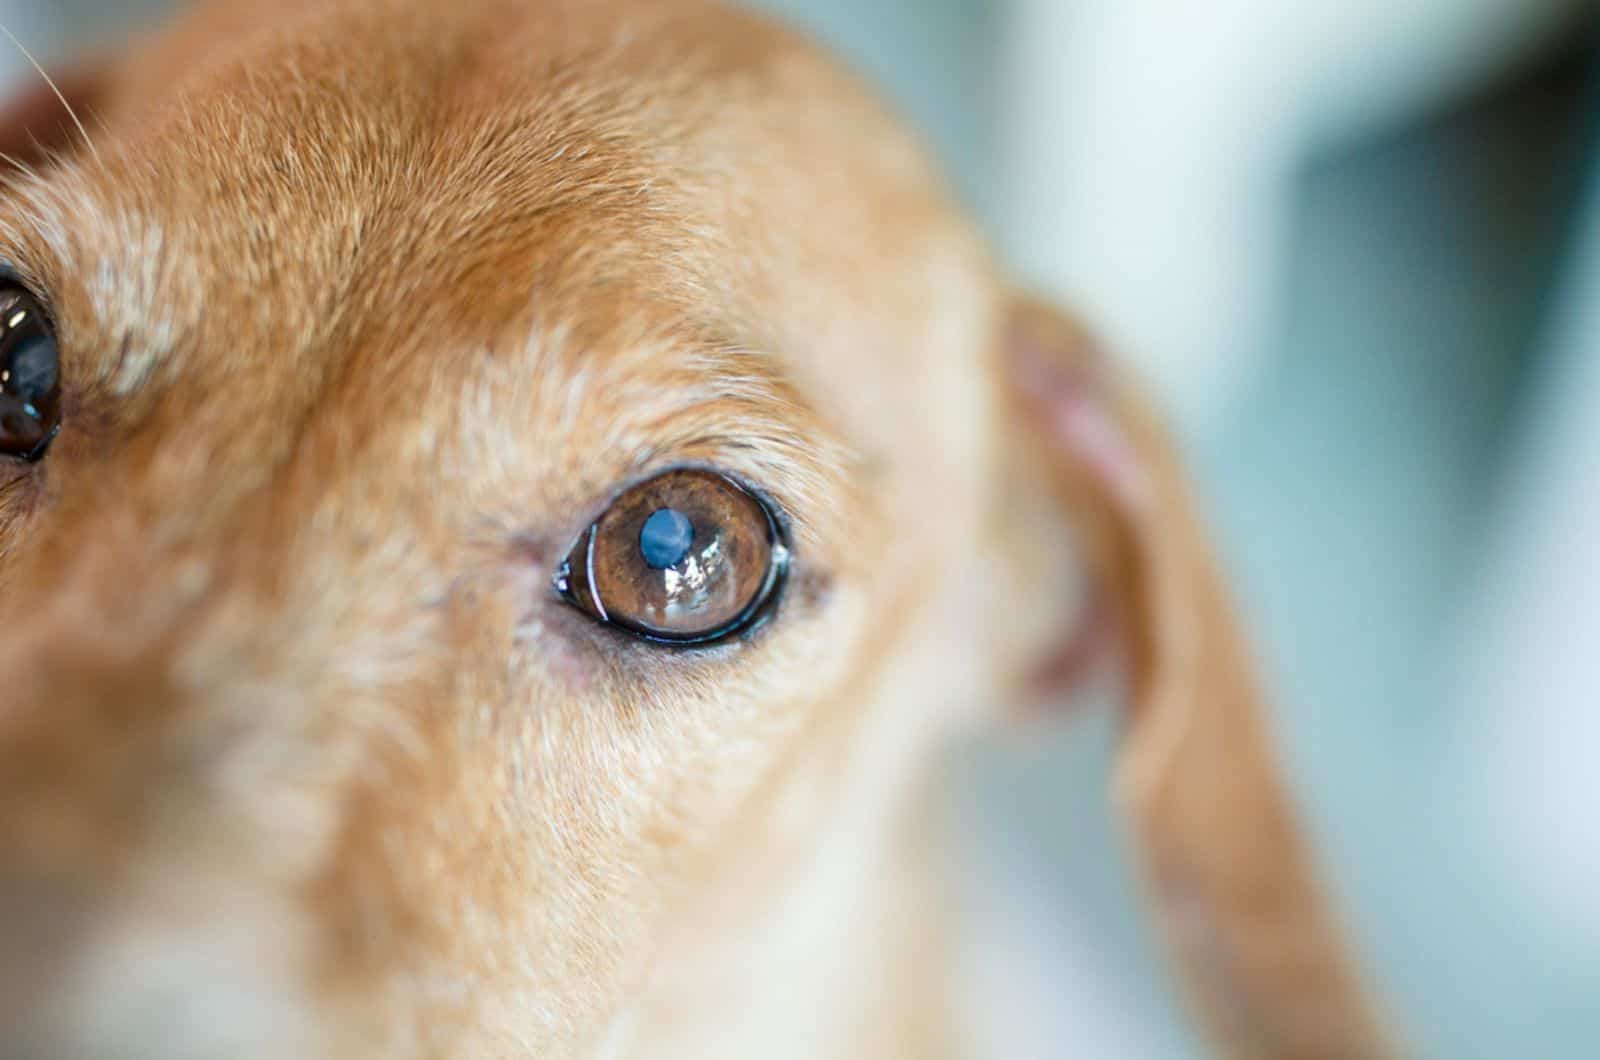 a dog with fungal infection of eye having watery eyes